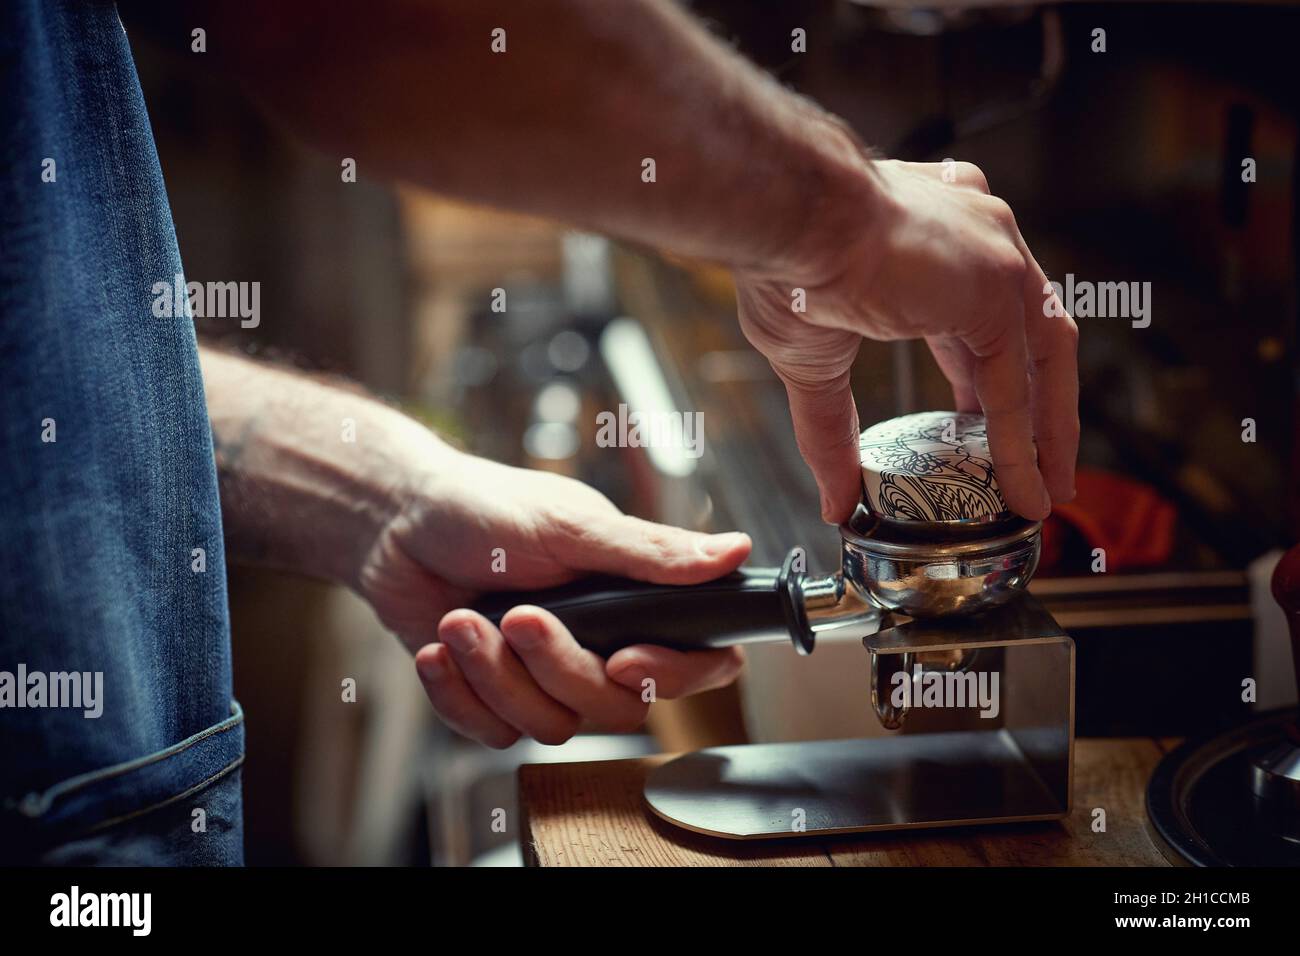 A barman behind the bar is preparing an aromatic and fragrant espresso beverage. Coffee, beverage, bar Stock Photo